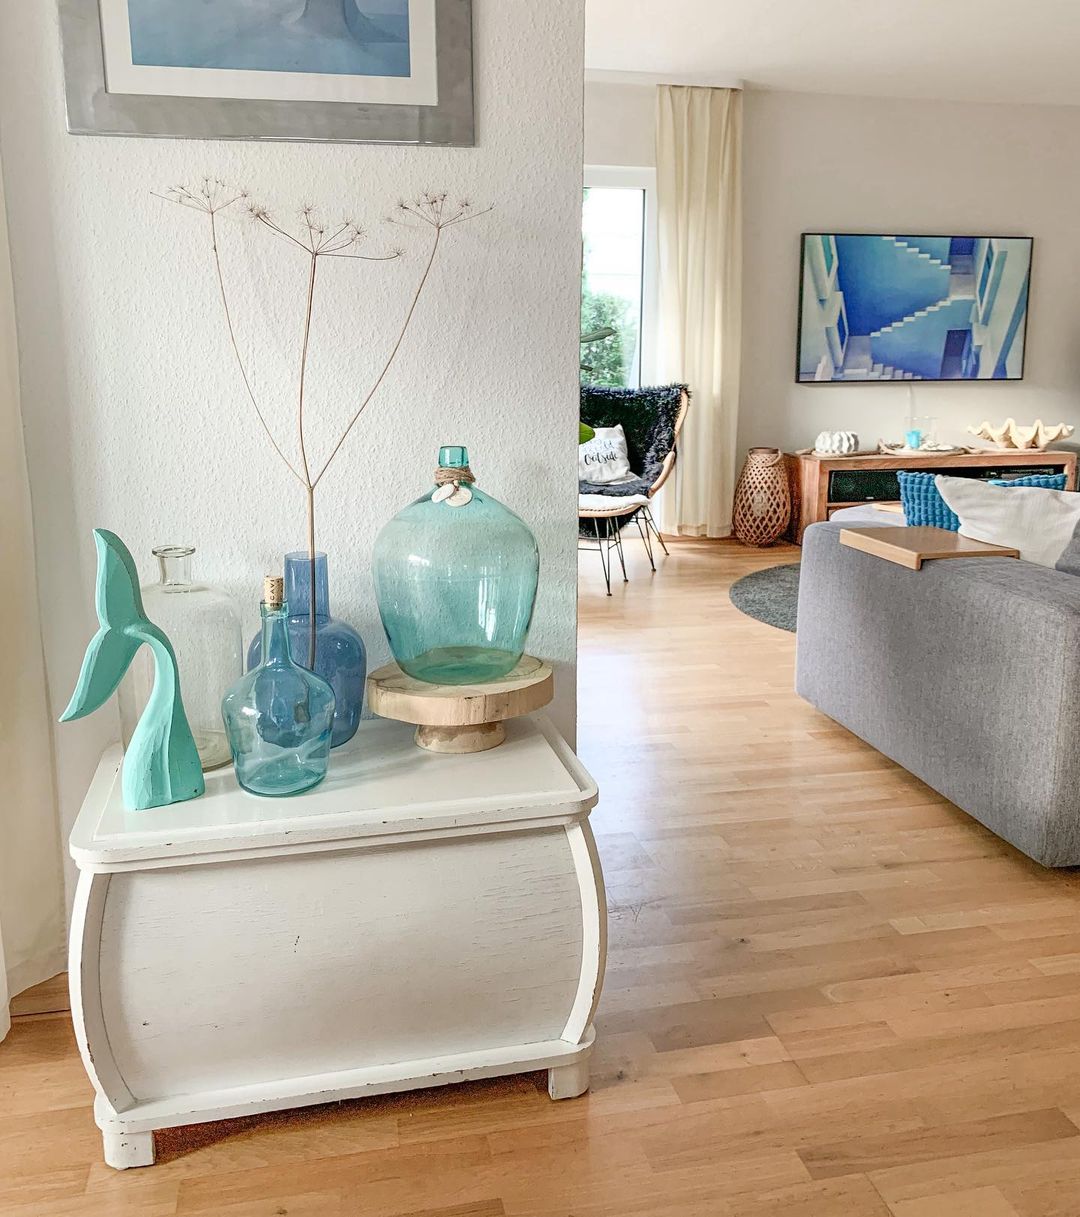 Create your own summer home decor paradise with a living room inspired by coastal furniture and table decor accents.